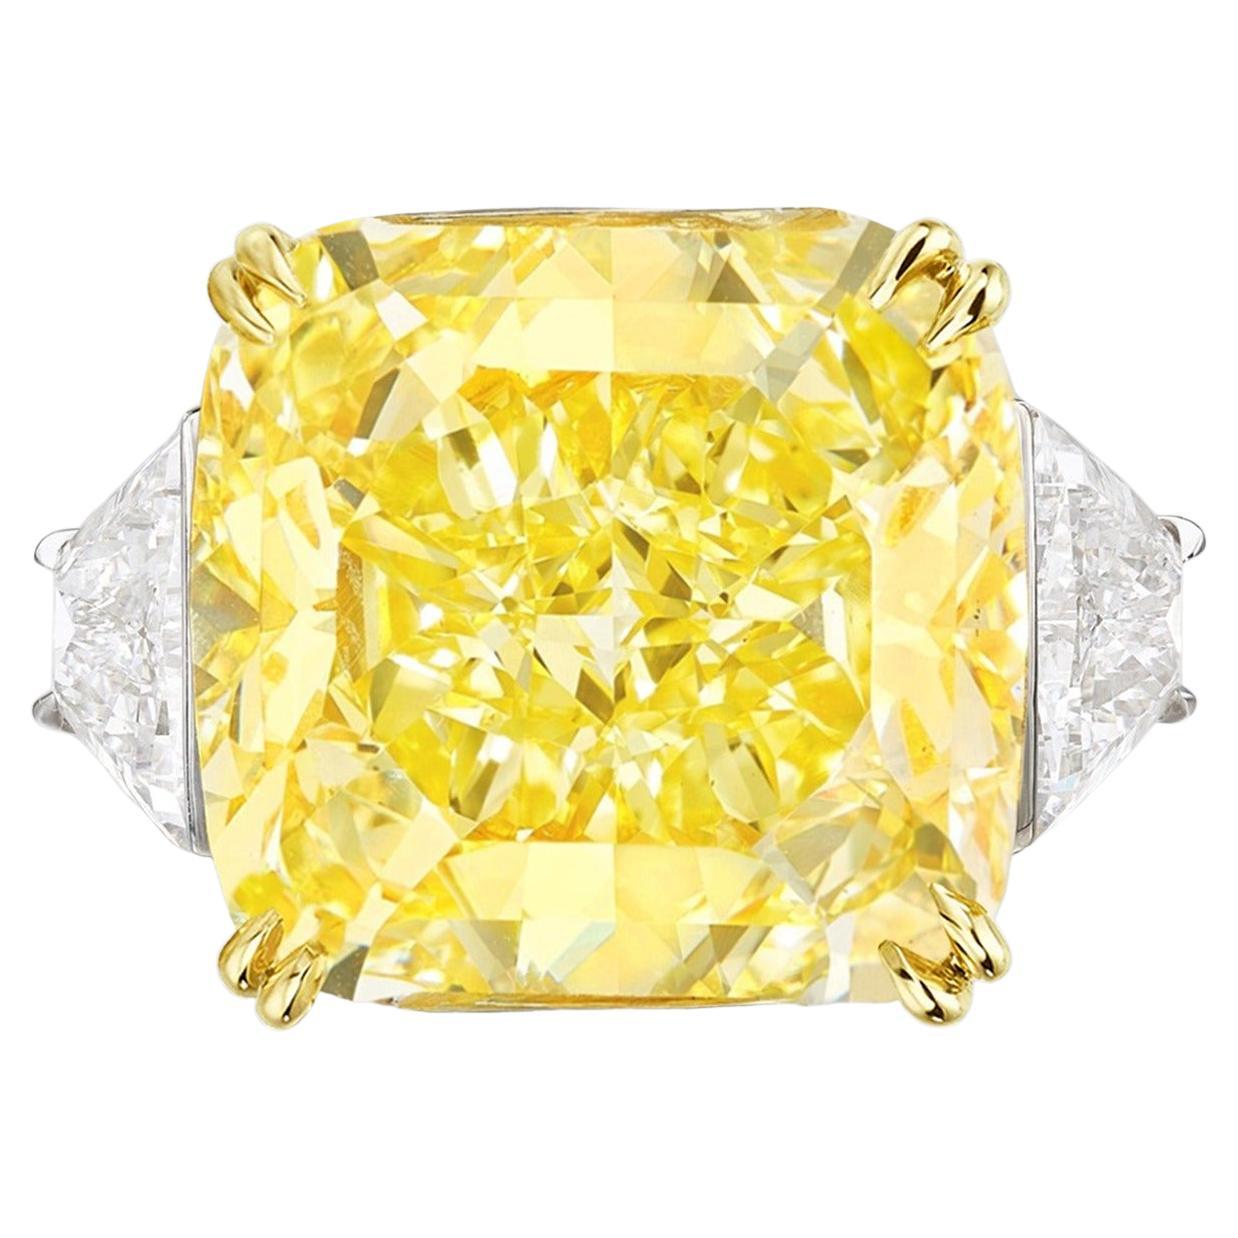 EXCEPTIONAL GIA Certified 23 Carat Fancy VIVID Yellow Diamond Ring For Sale